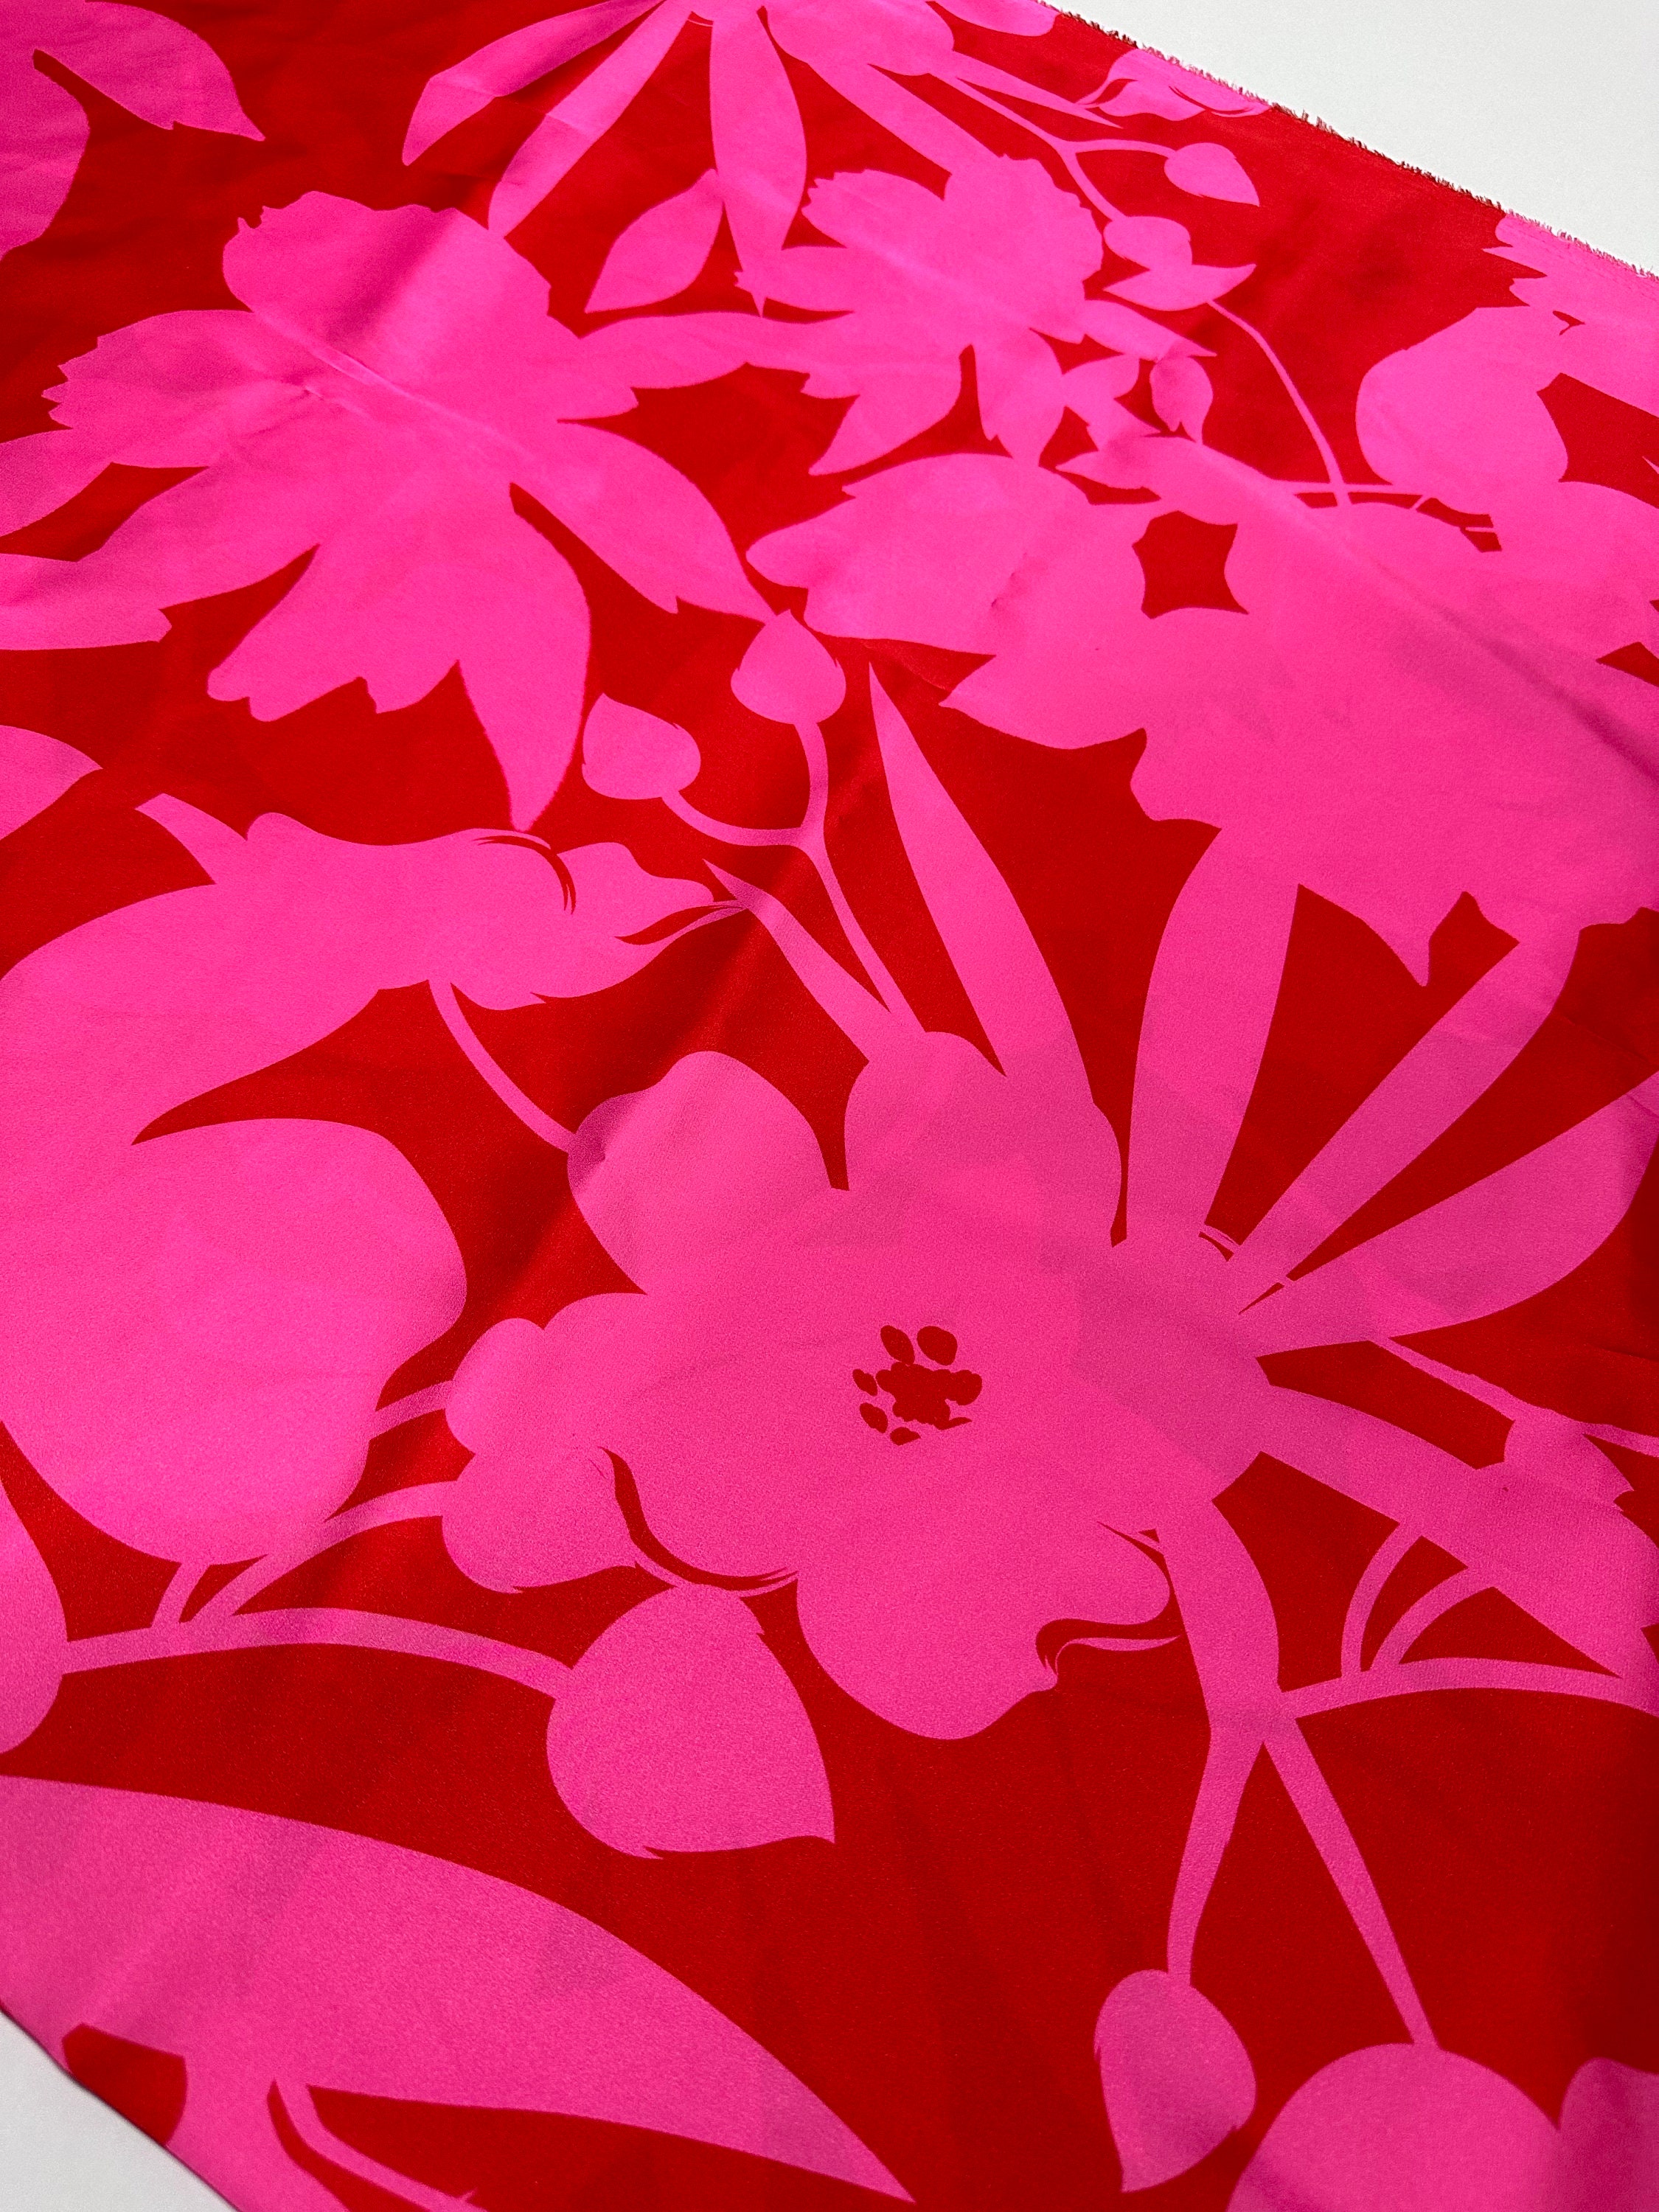 Taffy Pink Marquis Satin Fabric by The Yard (100% Polyester)